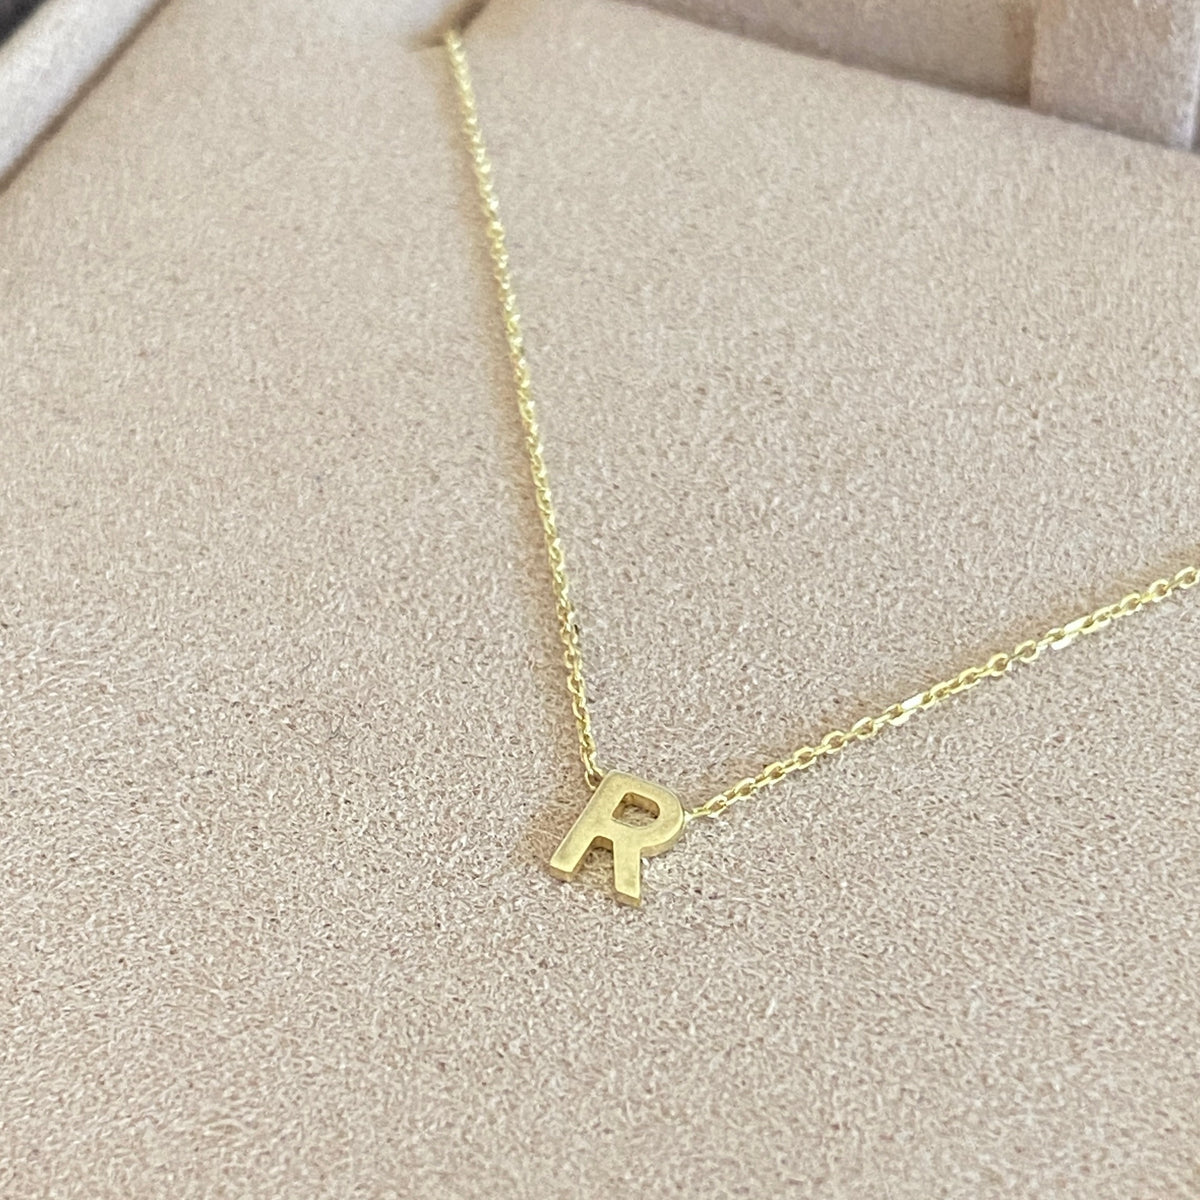 PETITE 'R' INITIAL NECKLACE | 9K SOLID GOLD